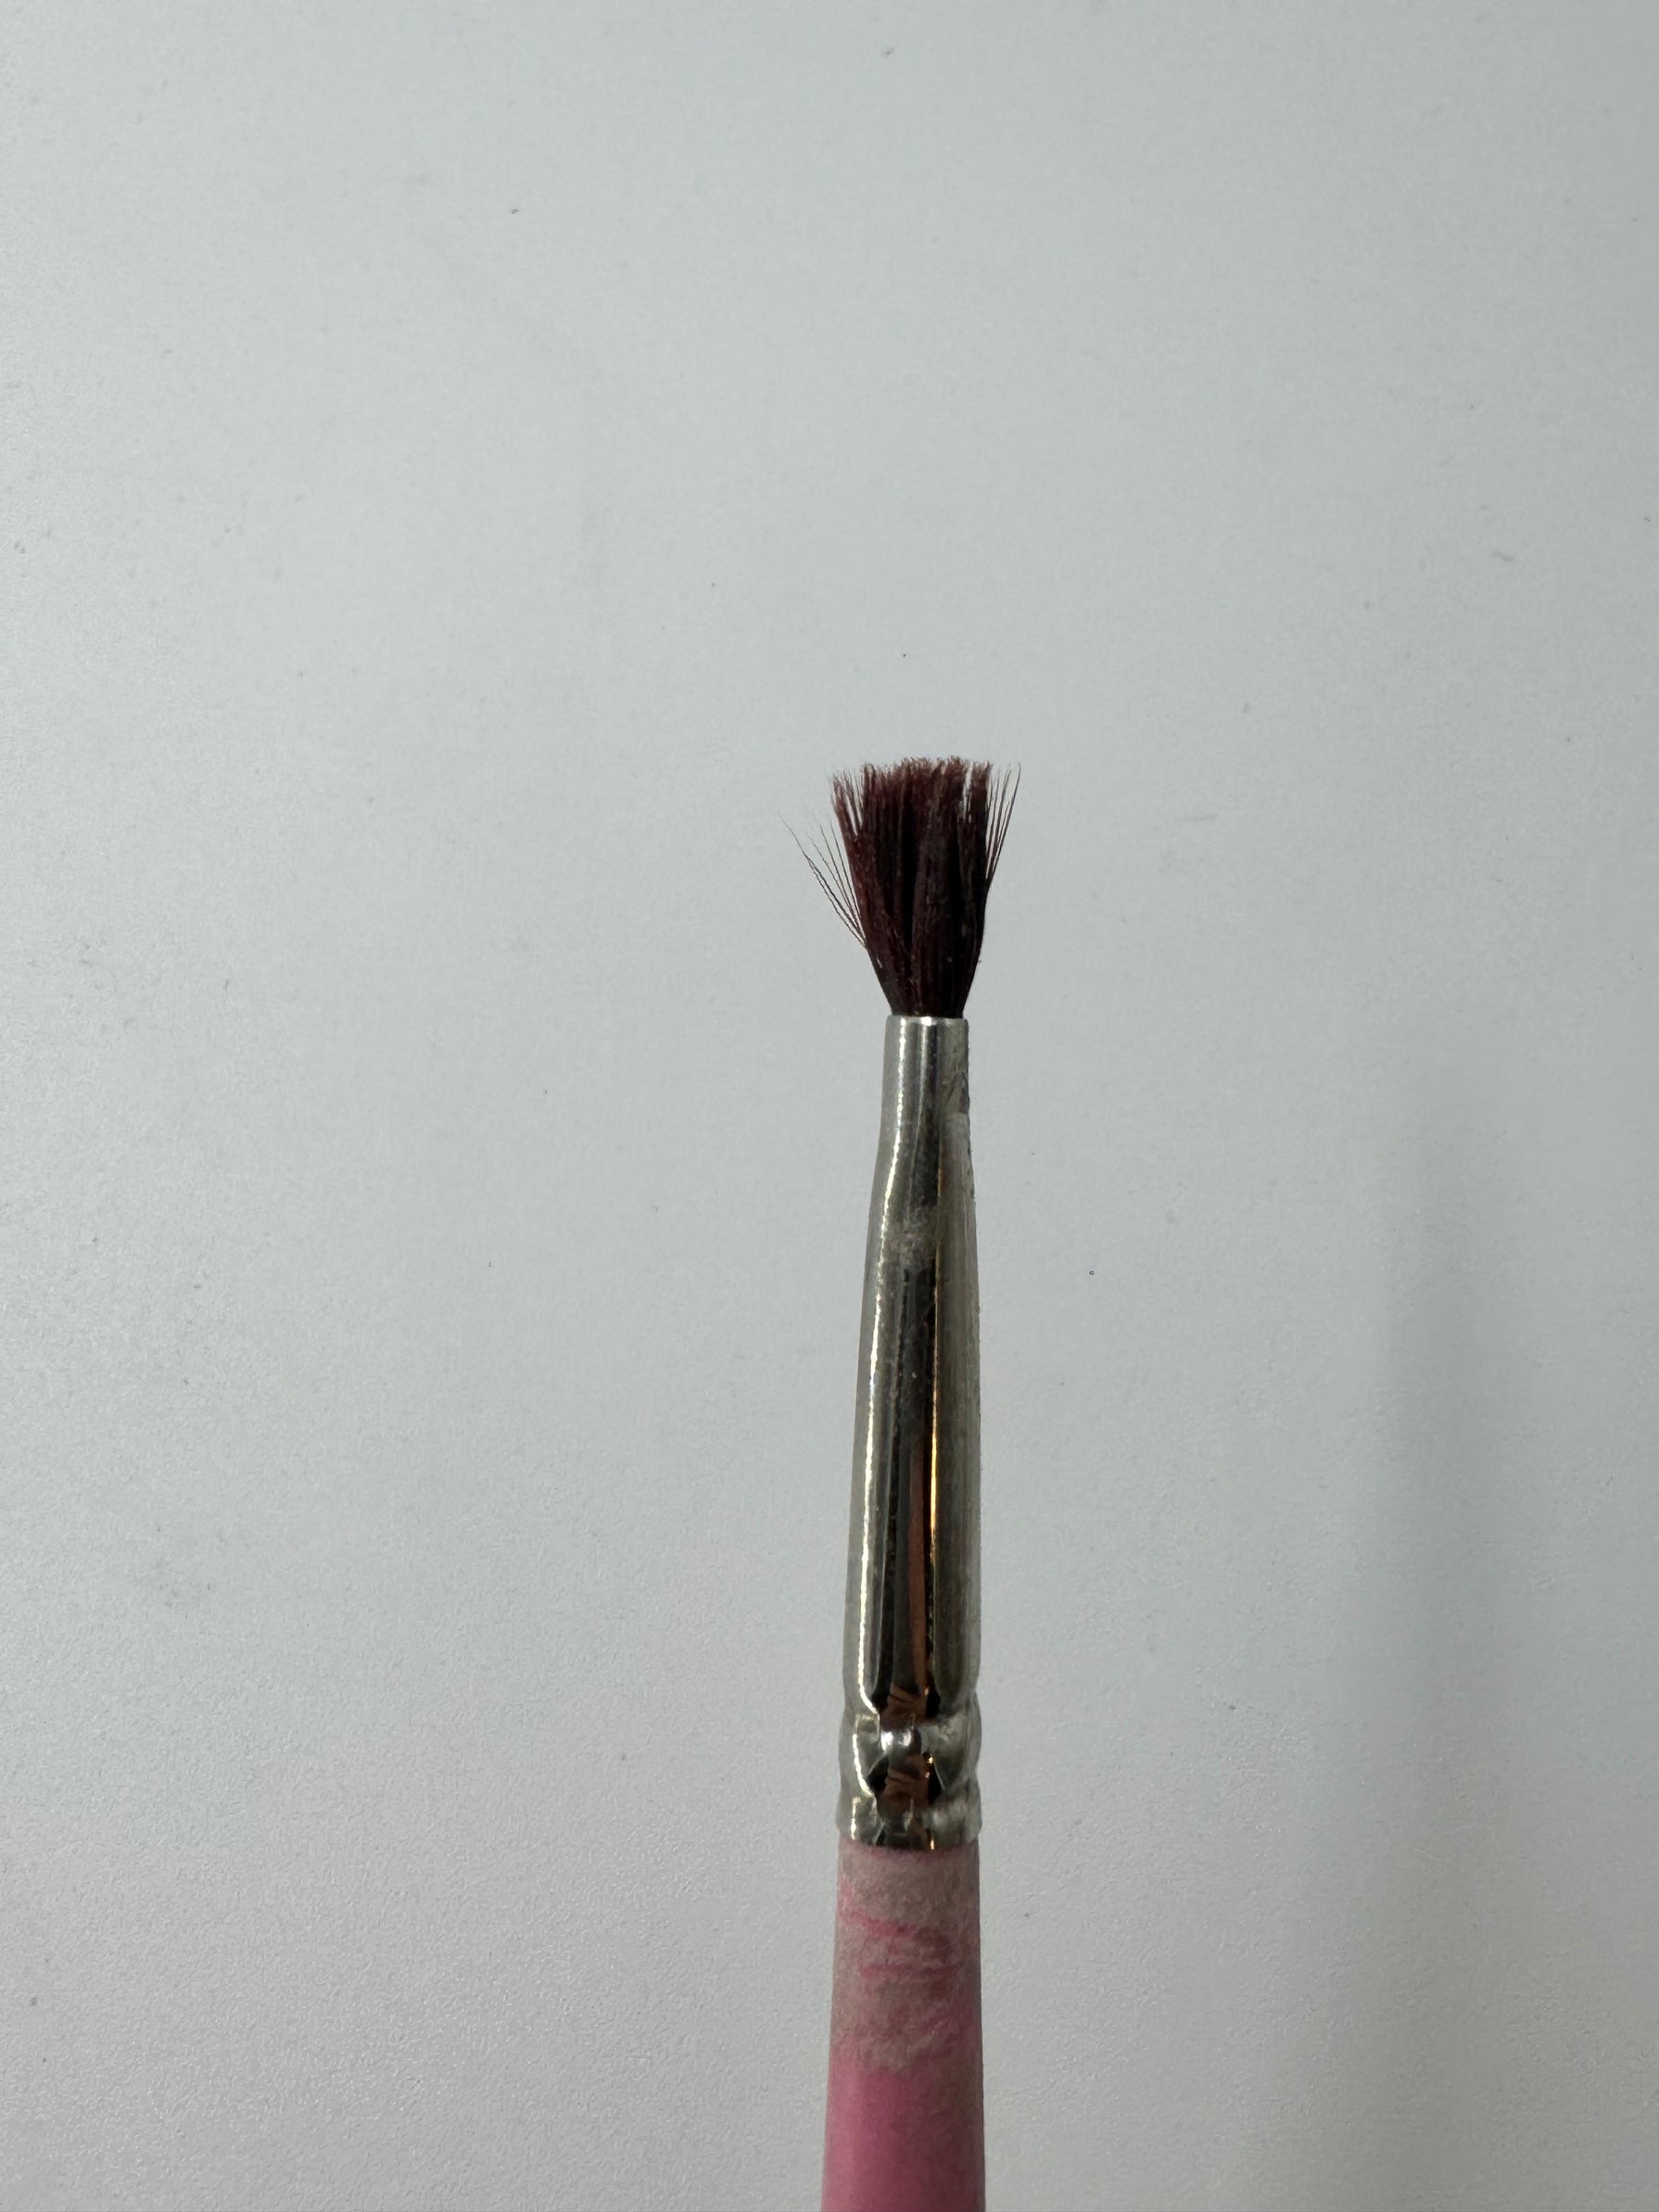  The image is expected to show a brush prior to cleaning, likely with visible signs of makeup or residue, illustrating its condition before the application of brush cleansing gel.